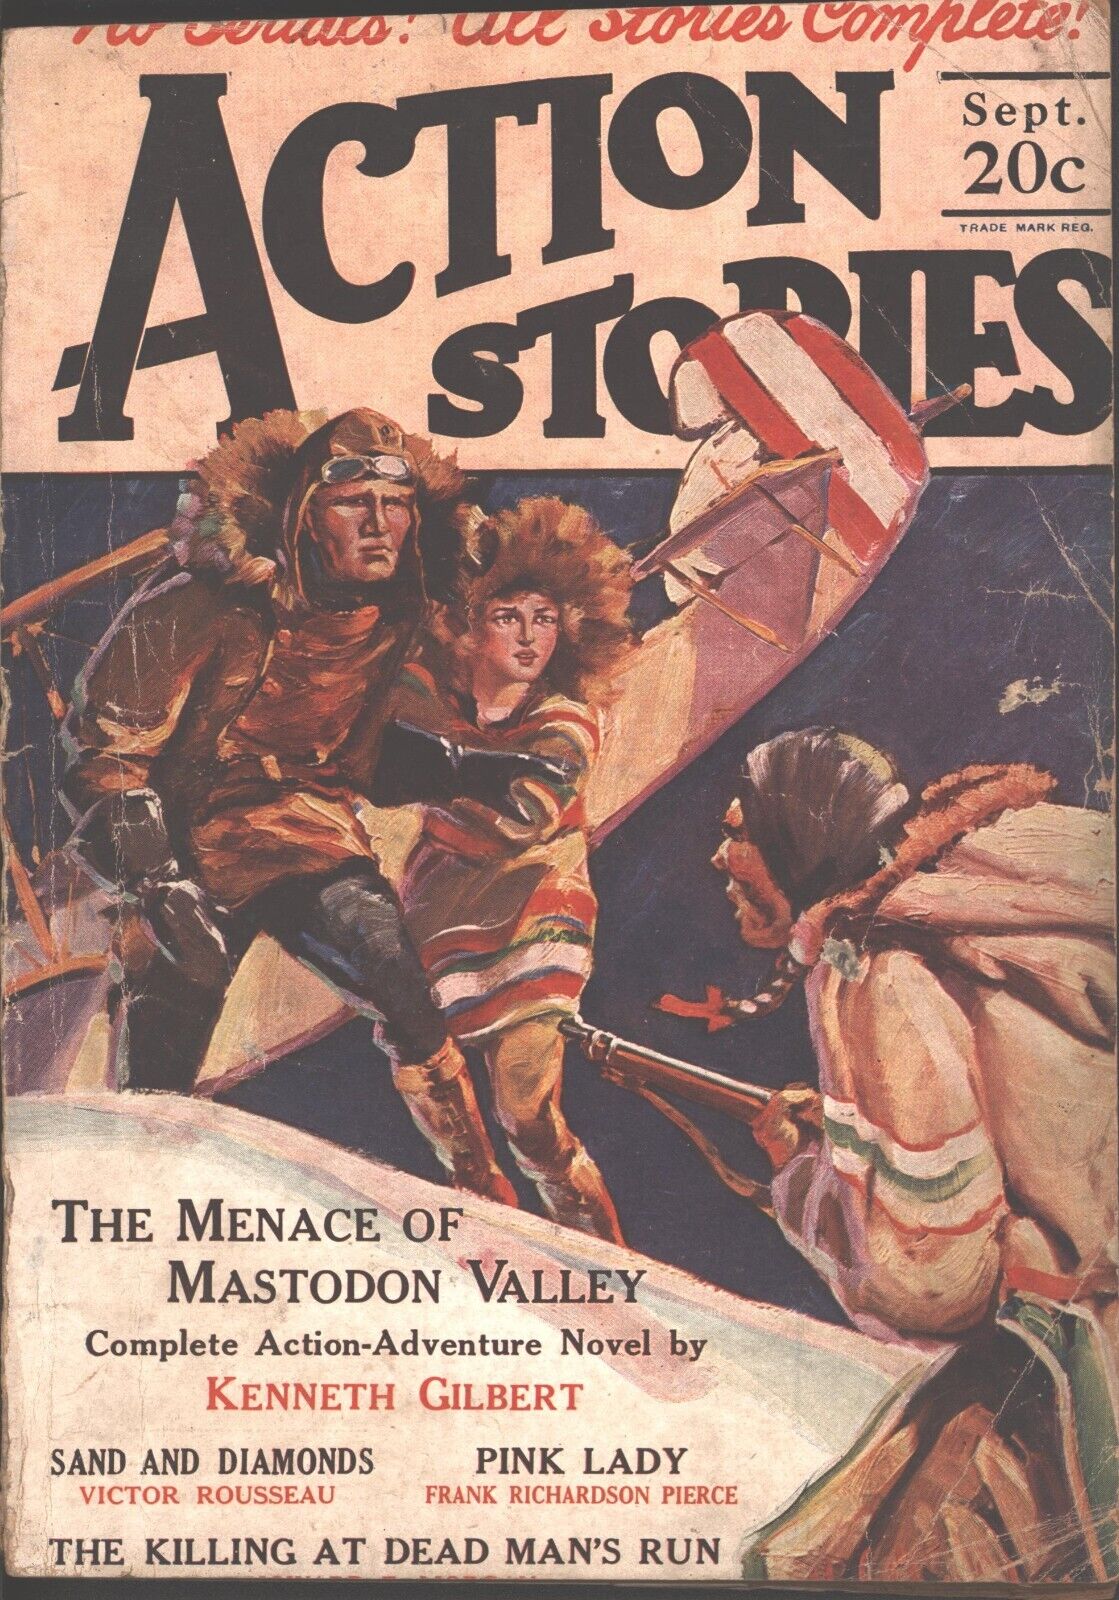 Action Stories 1926 September.  Pulp